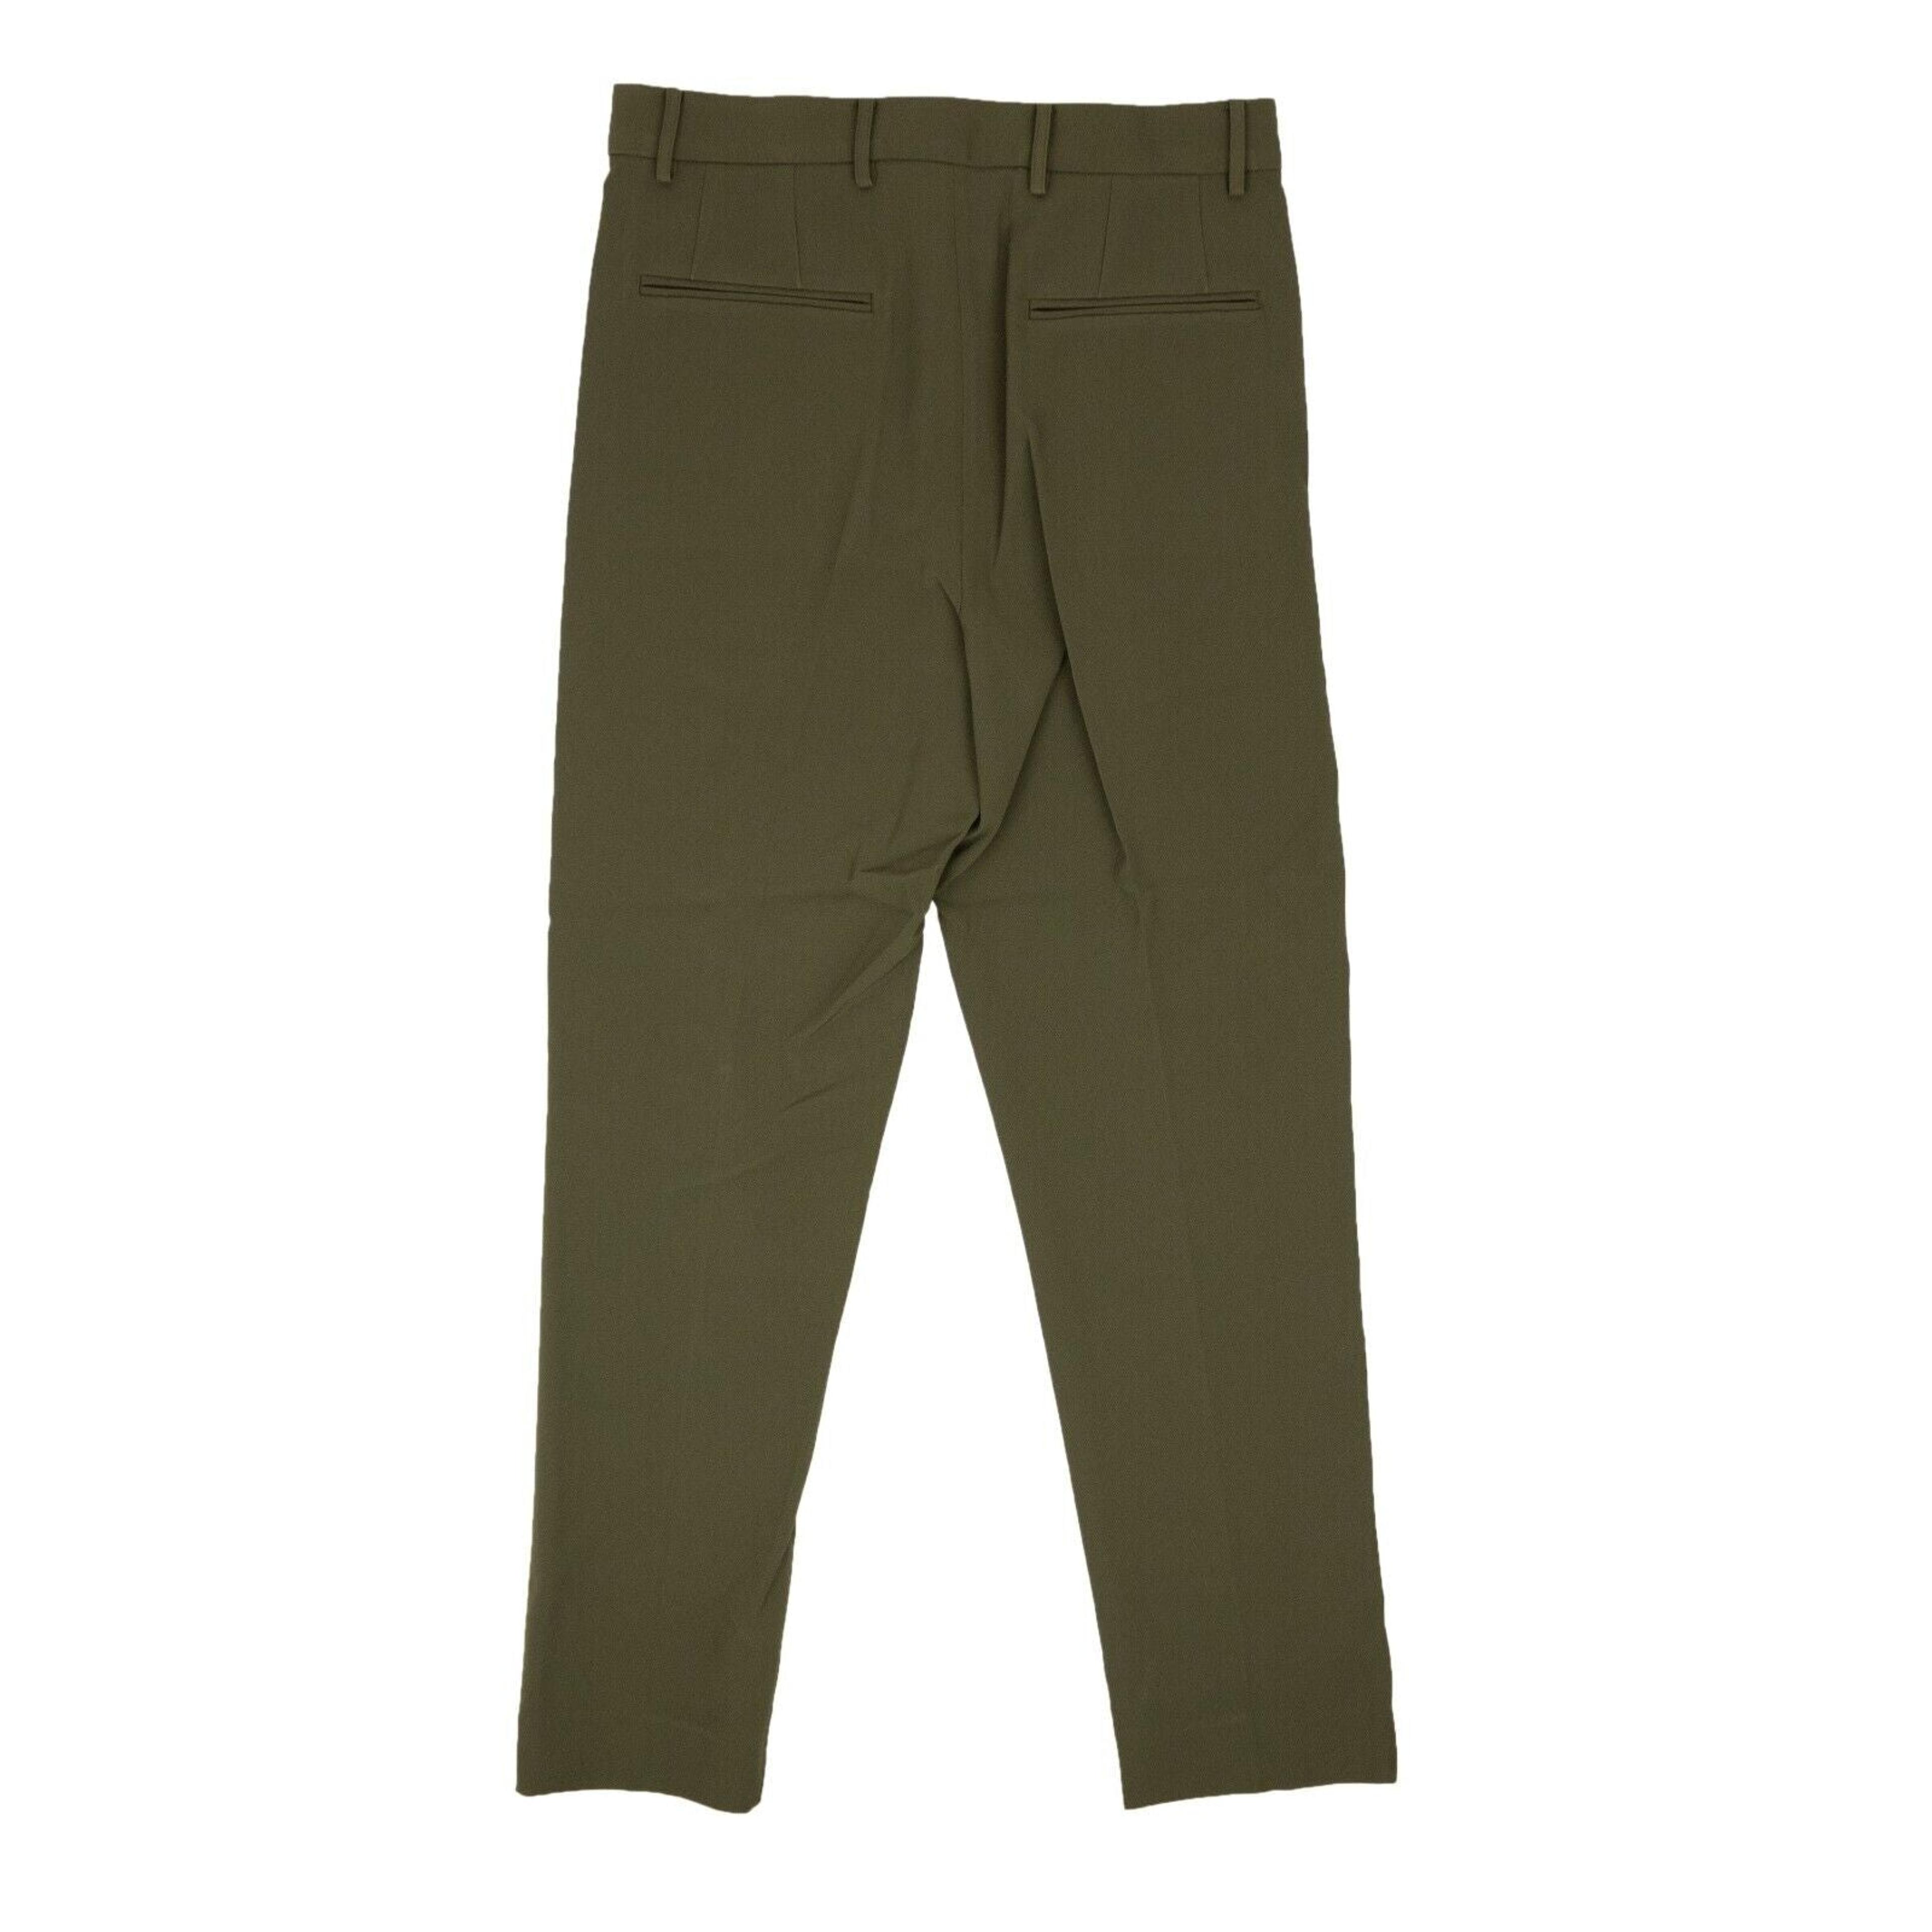 Alternate View 2 of Olive Green Polyester Twill Trousers